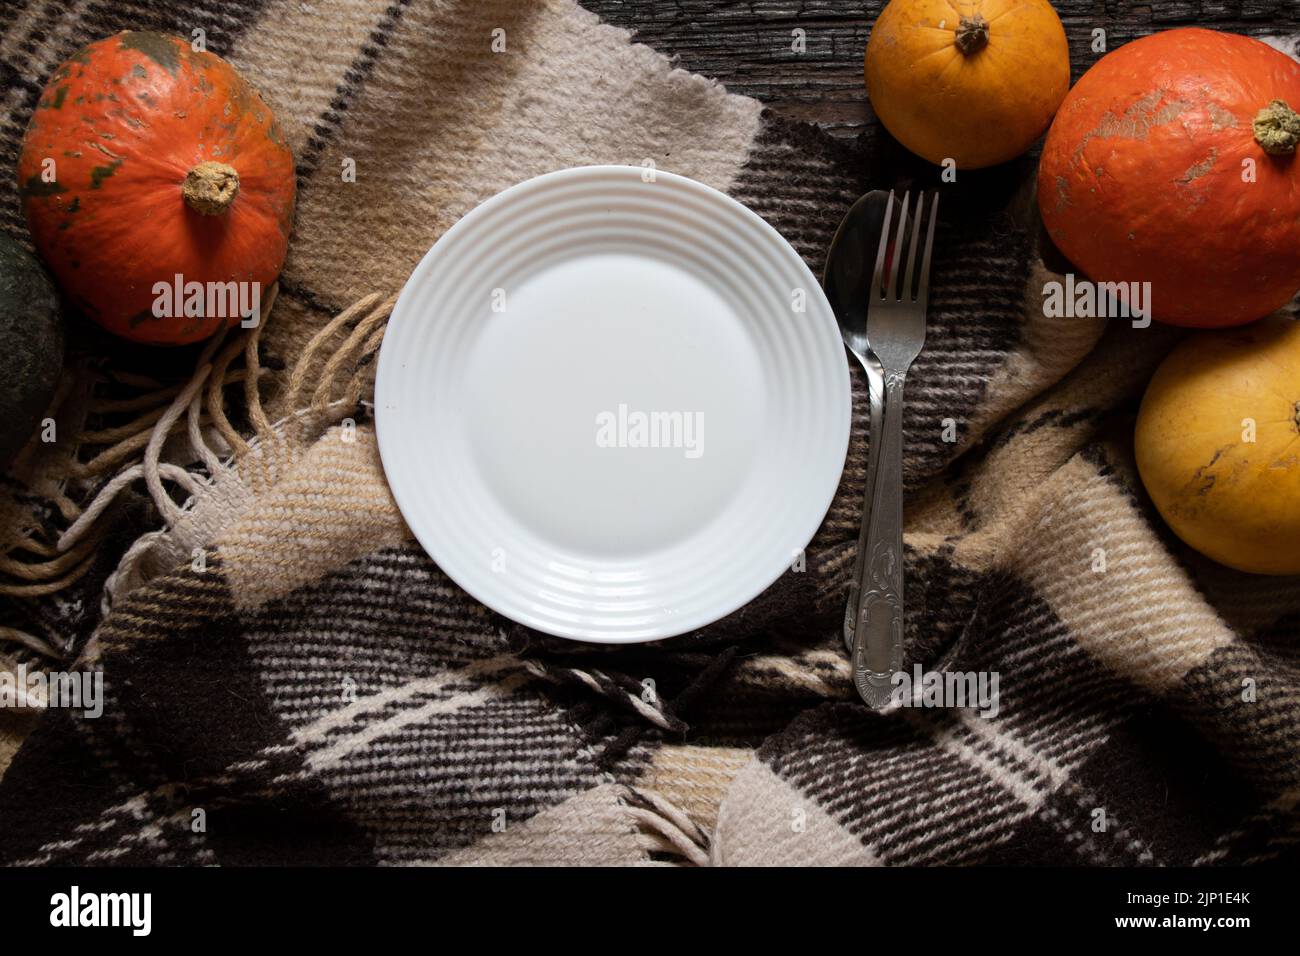 white plate on the table on a checkered tablecloth and next to pumpkins on an old wooden table, festive serving decor, plate on the table, dishes on t Stock Photo